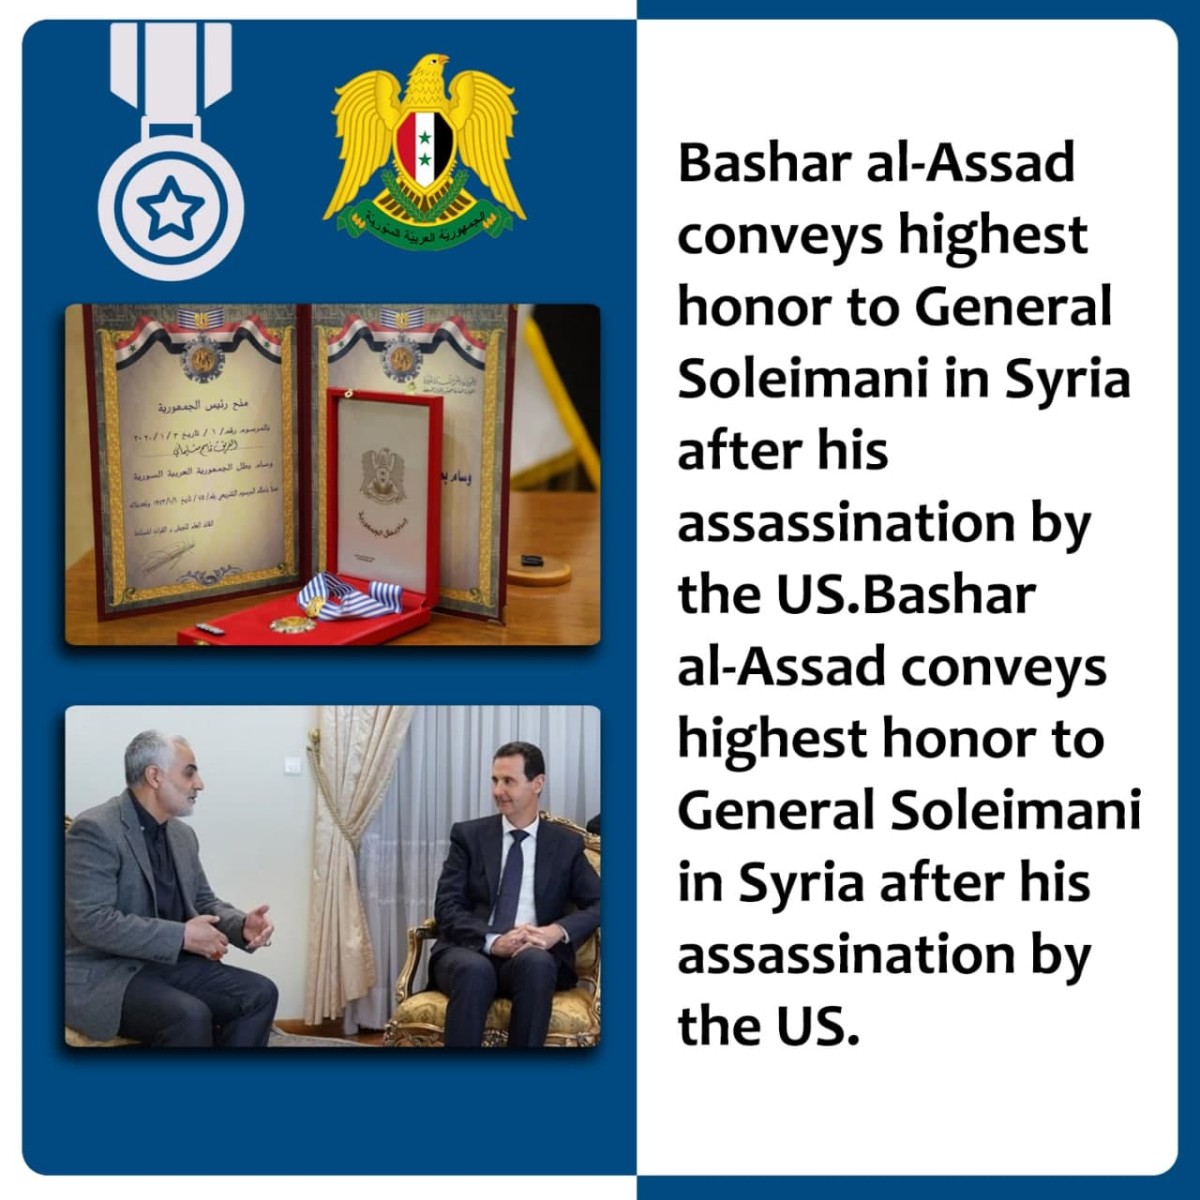  Bashar al-Assad conveys highest honor to General Soleimani in Syria after his assassination by the US